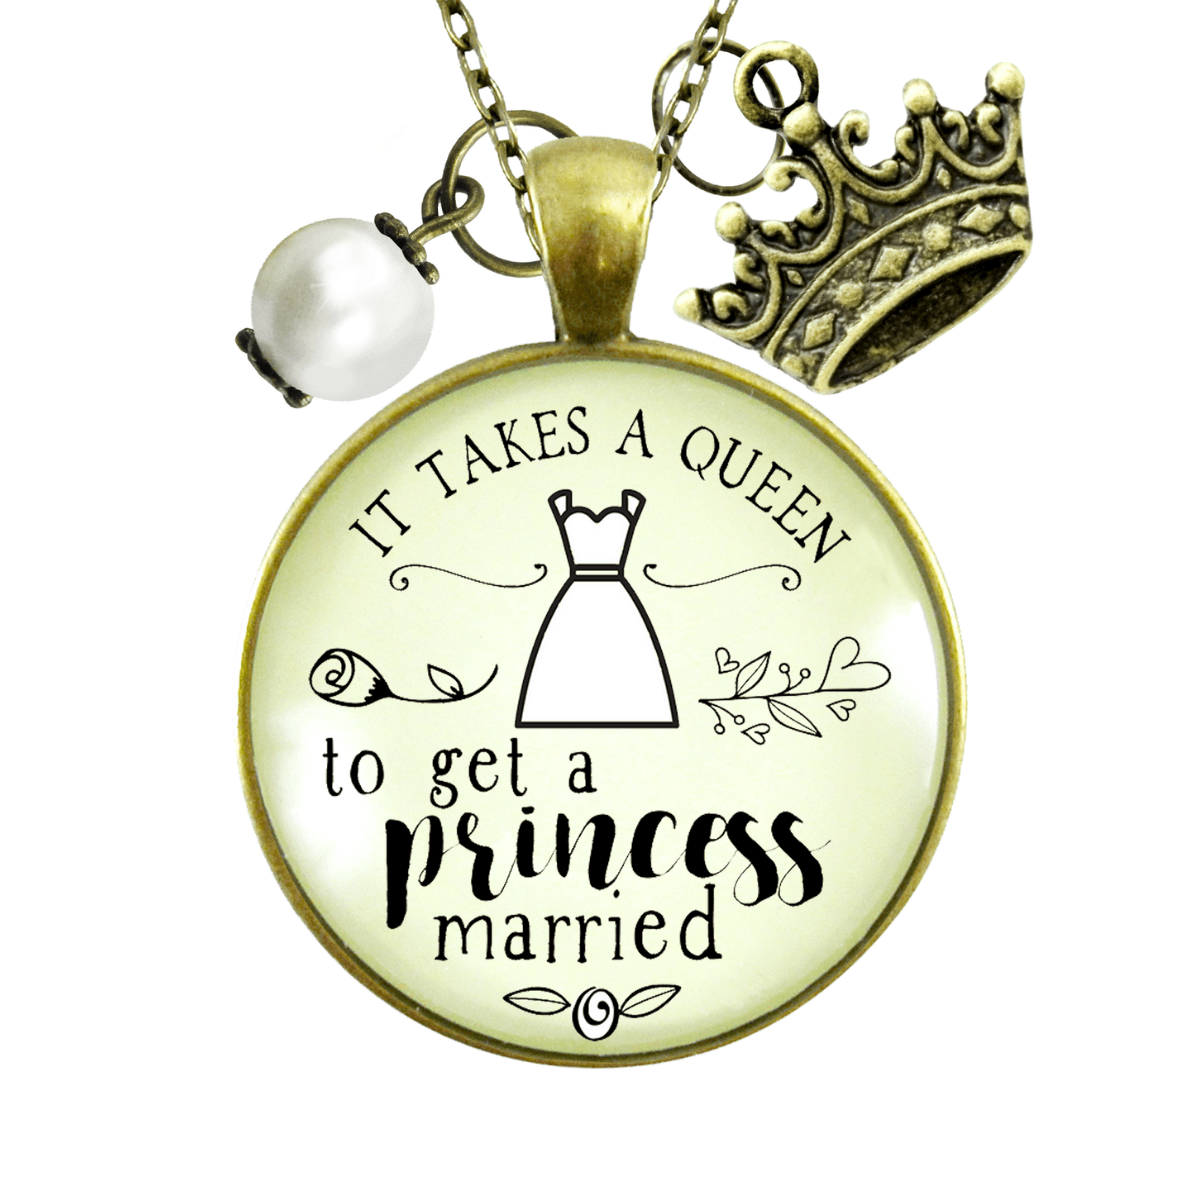 Gutsy Goodness Wedding Planner Necklace Takes Queen Bridesmaid Gift Princess Jewelry - Gutsy Goodness Handmade Jewelry;Wedding Planner Necklace Takes Queen Bridesmaid Gift Princess Jewelry - Gutsy Goodness Handmade Jewelry Gifts